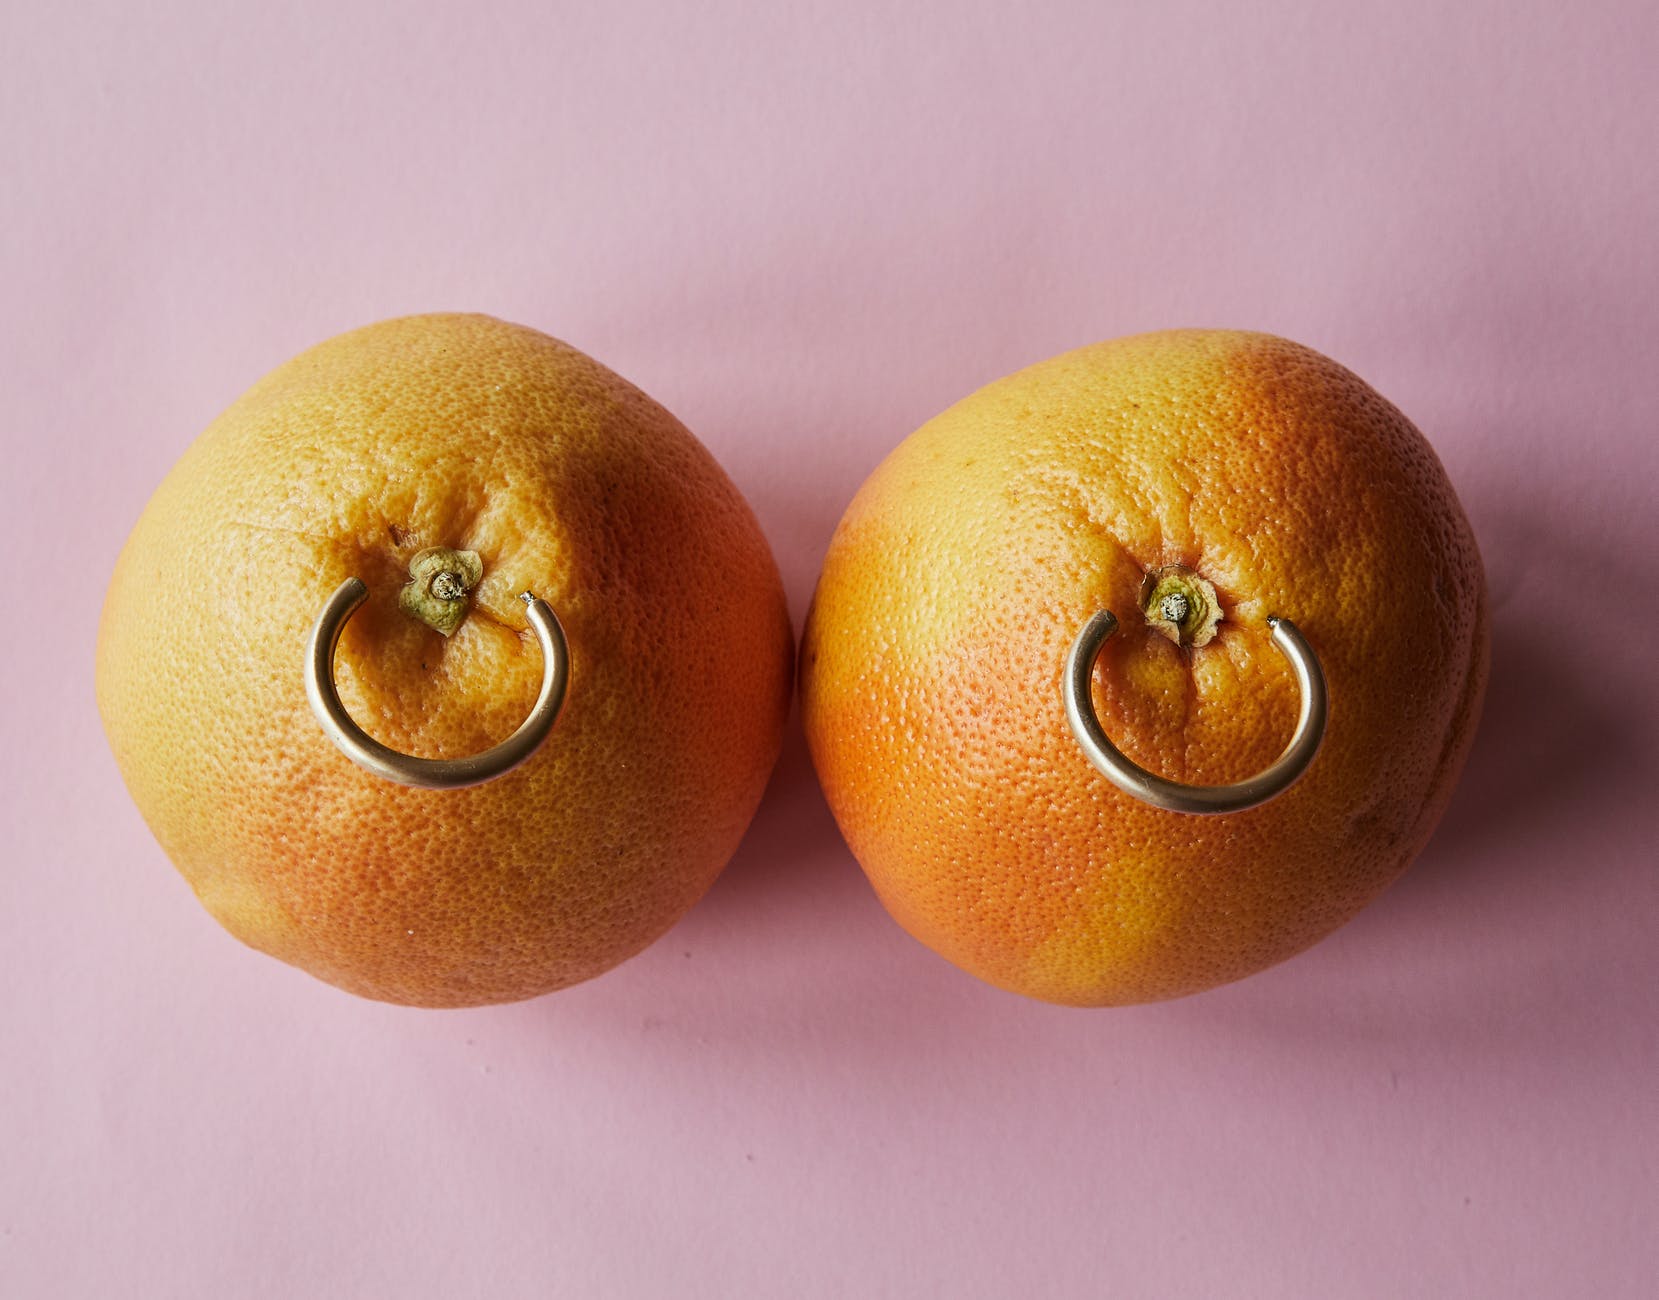 fresh mandarins with earrings placed on pink surface